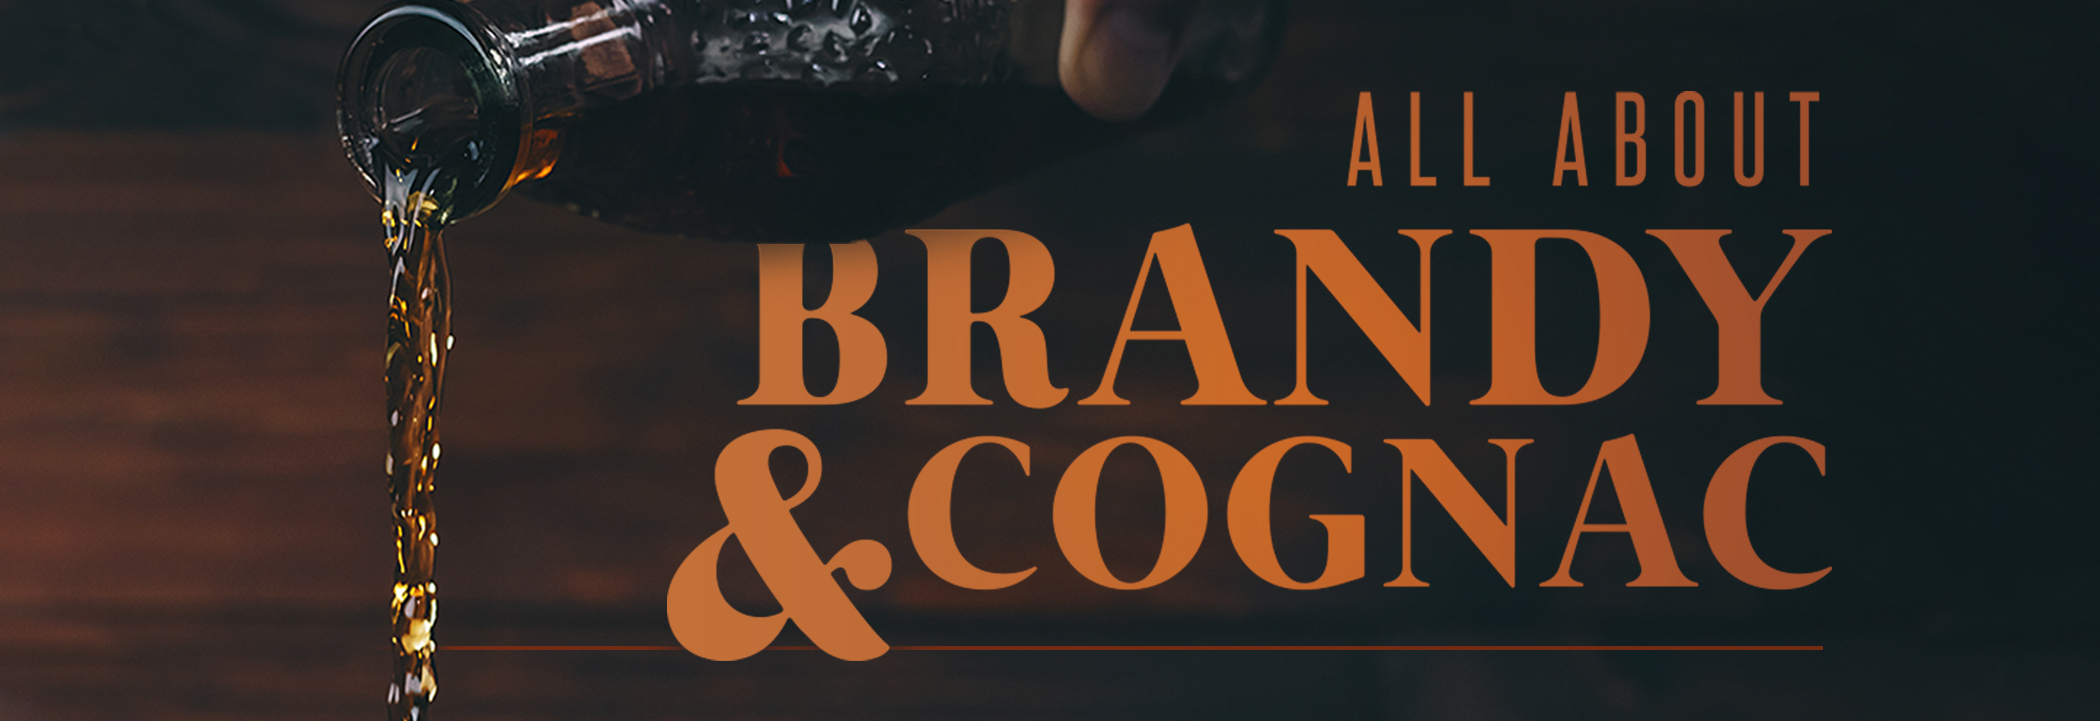 All About Brandy and Cognac header